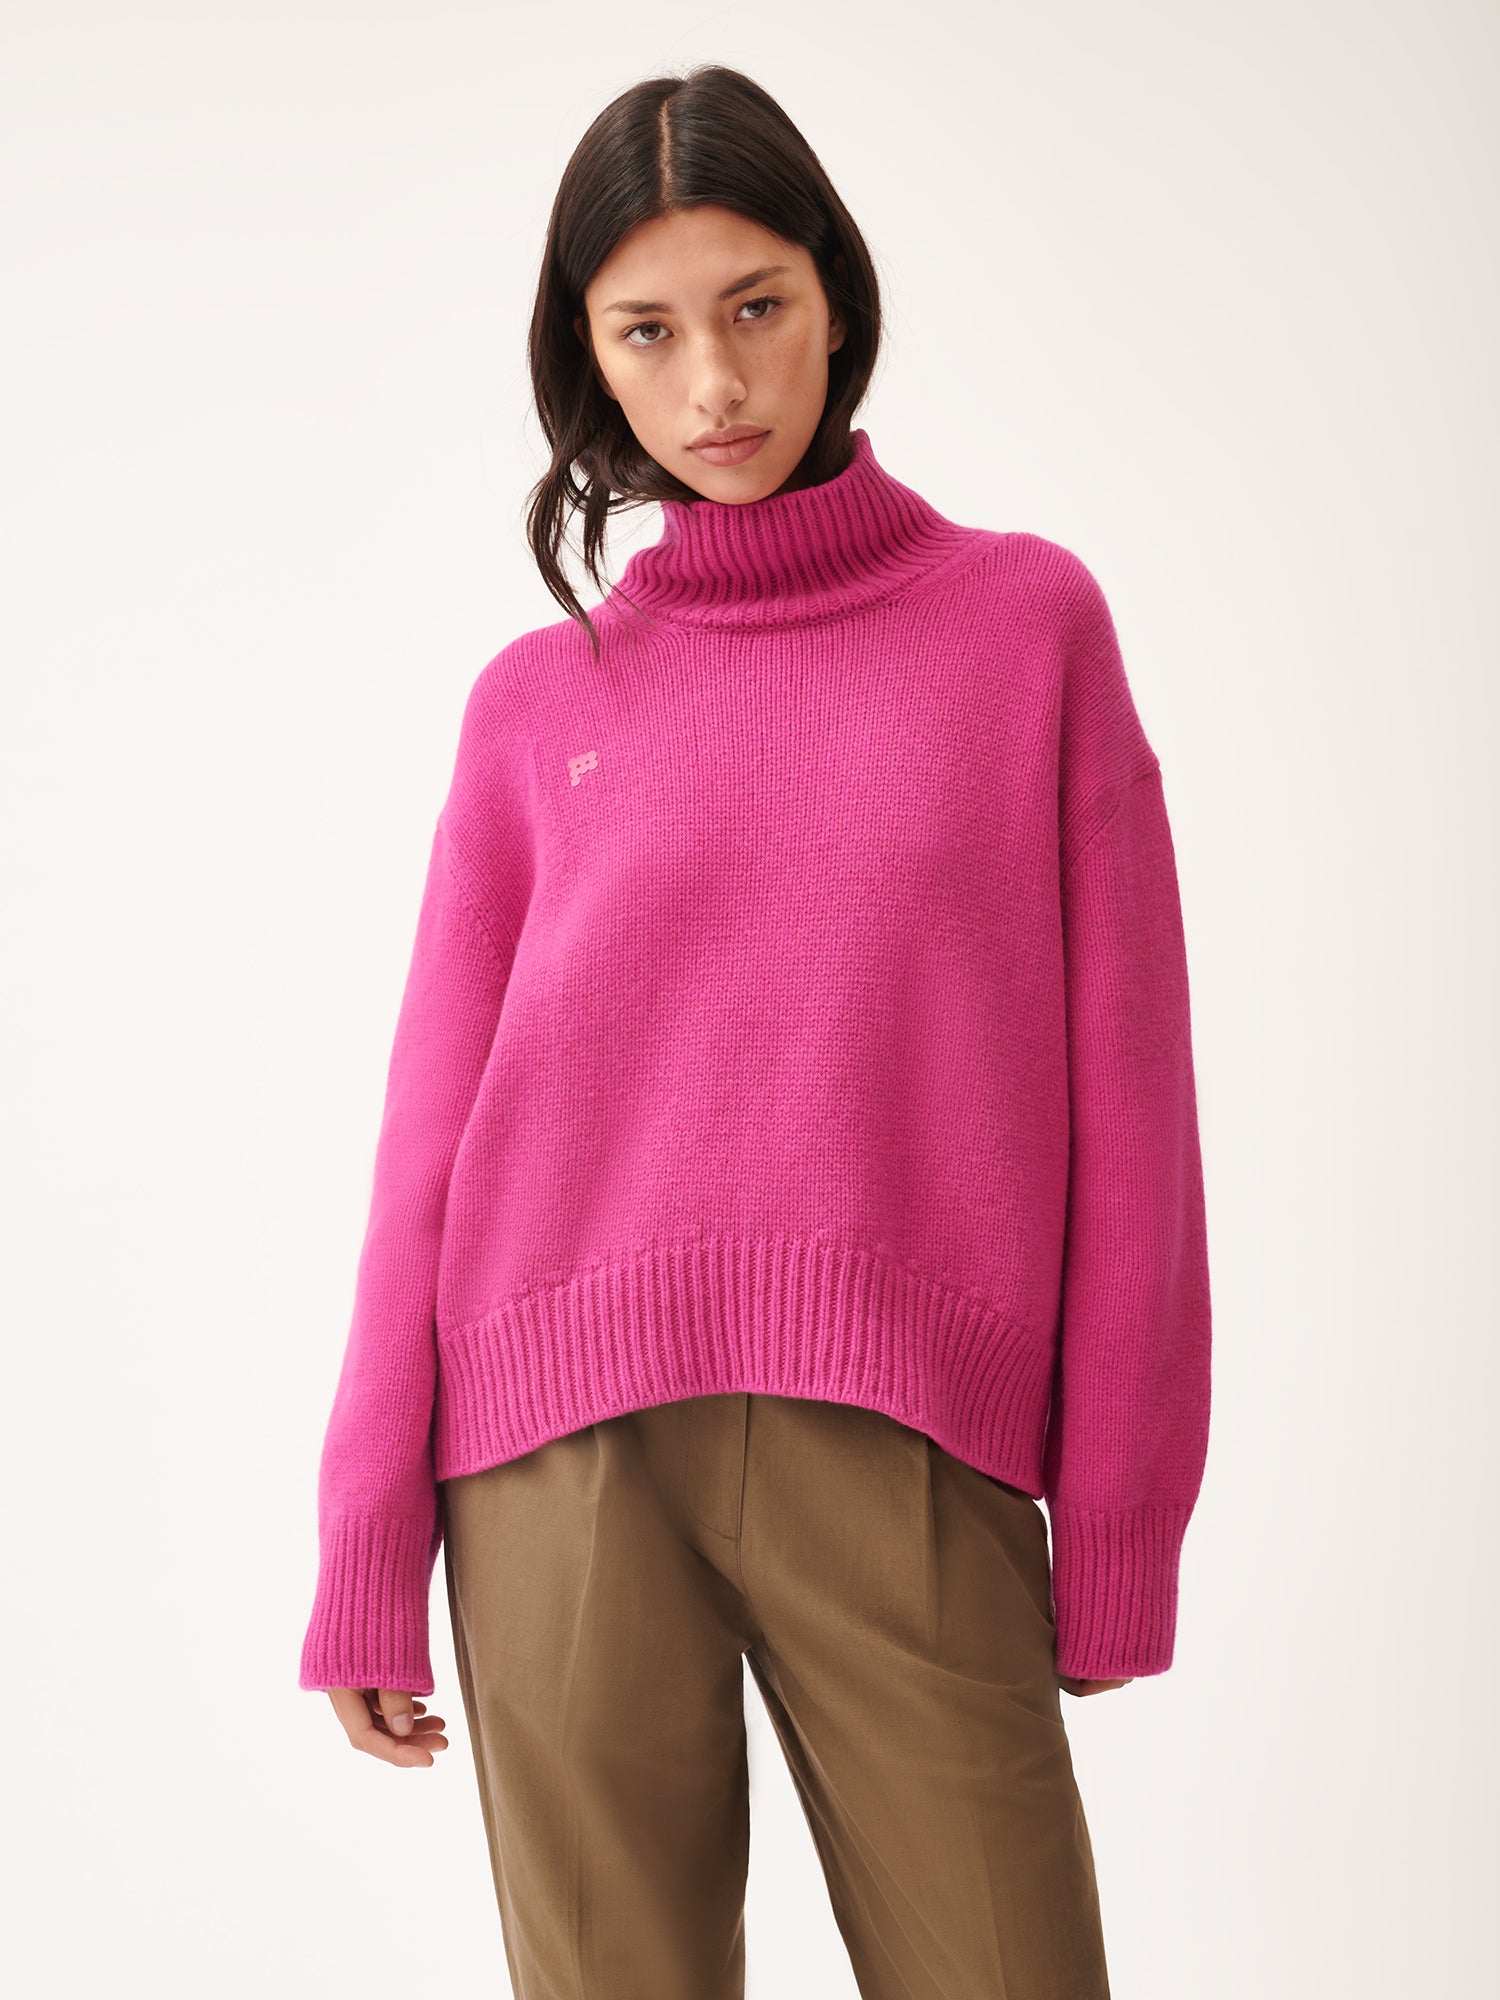 Womens_Recycled_Cashmere_Knit_Chunky_Turtleneck_Sweater_Tourmaline_Pink-female-1